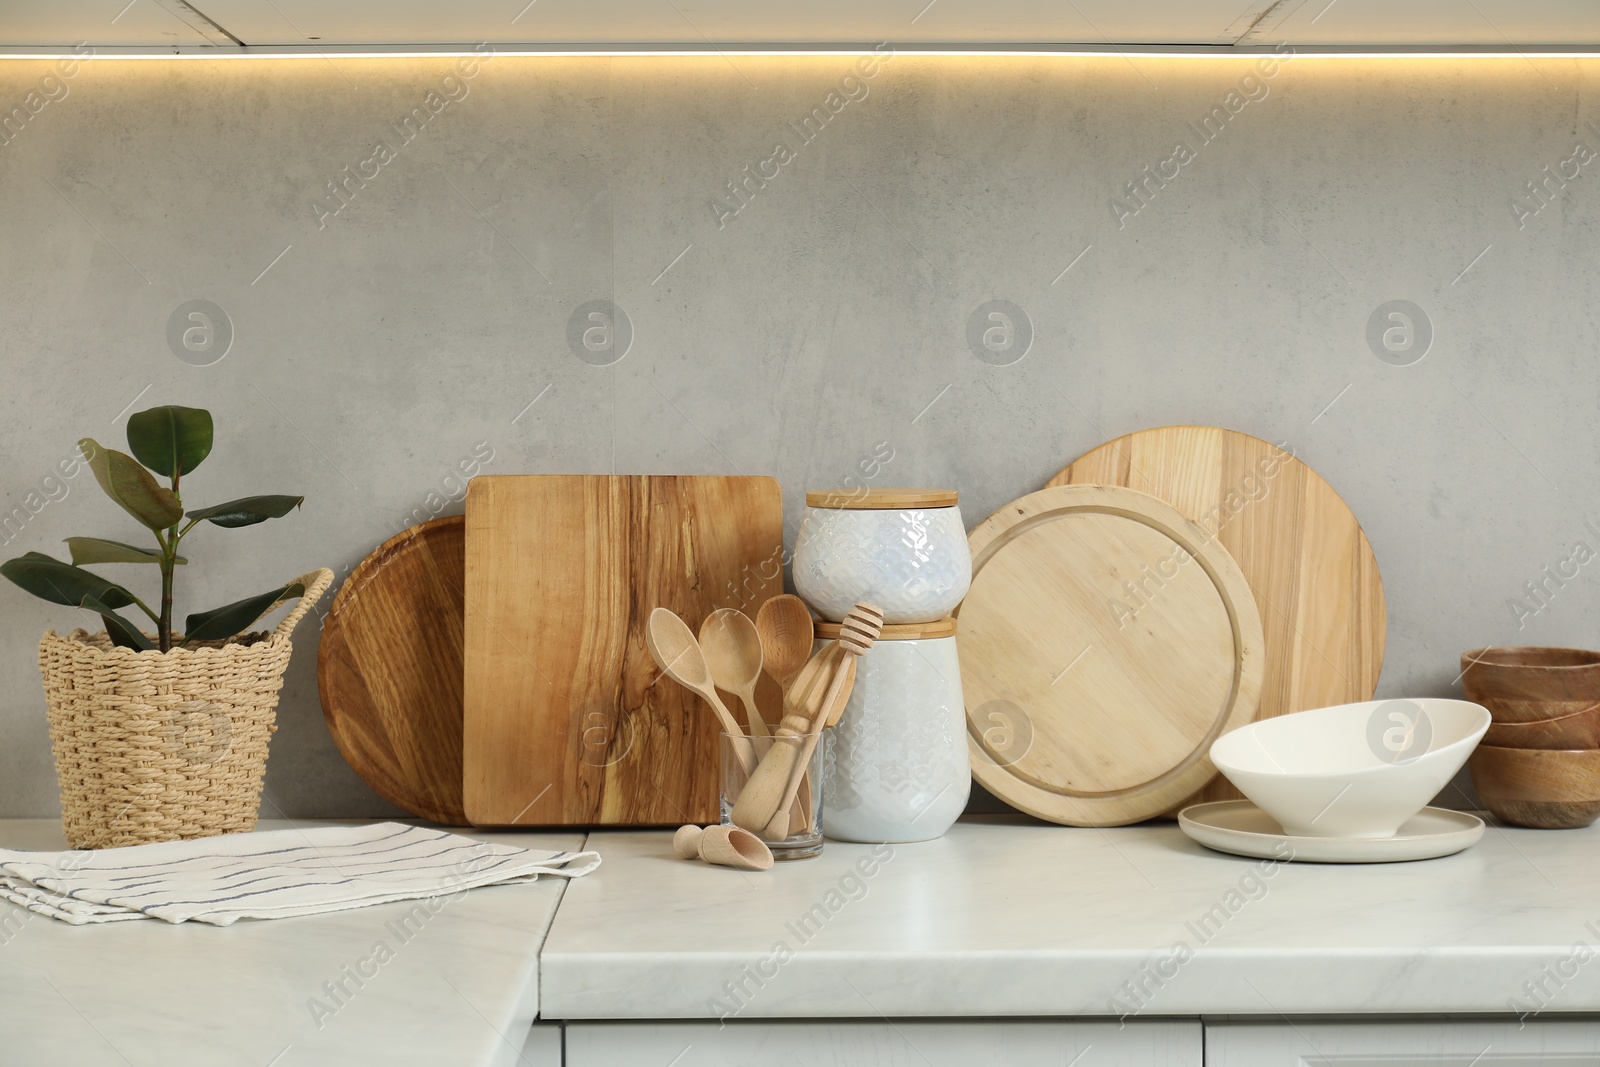 Photo of DIfferent wooden cutting boards, other cooking utensils and houseplant on white countertop in kitchen